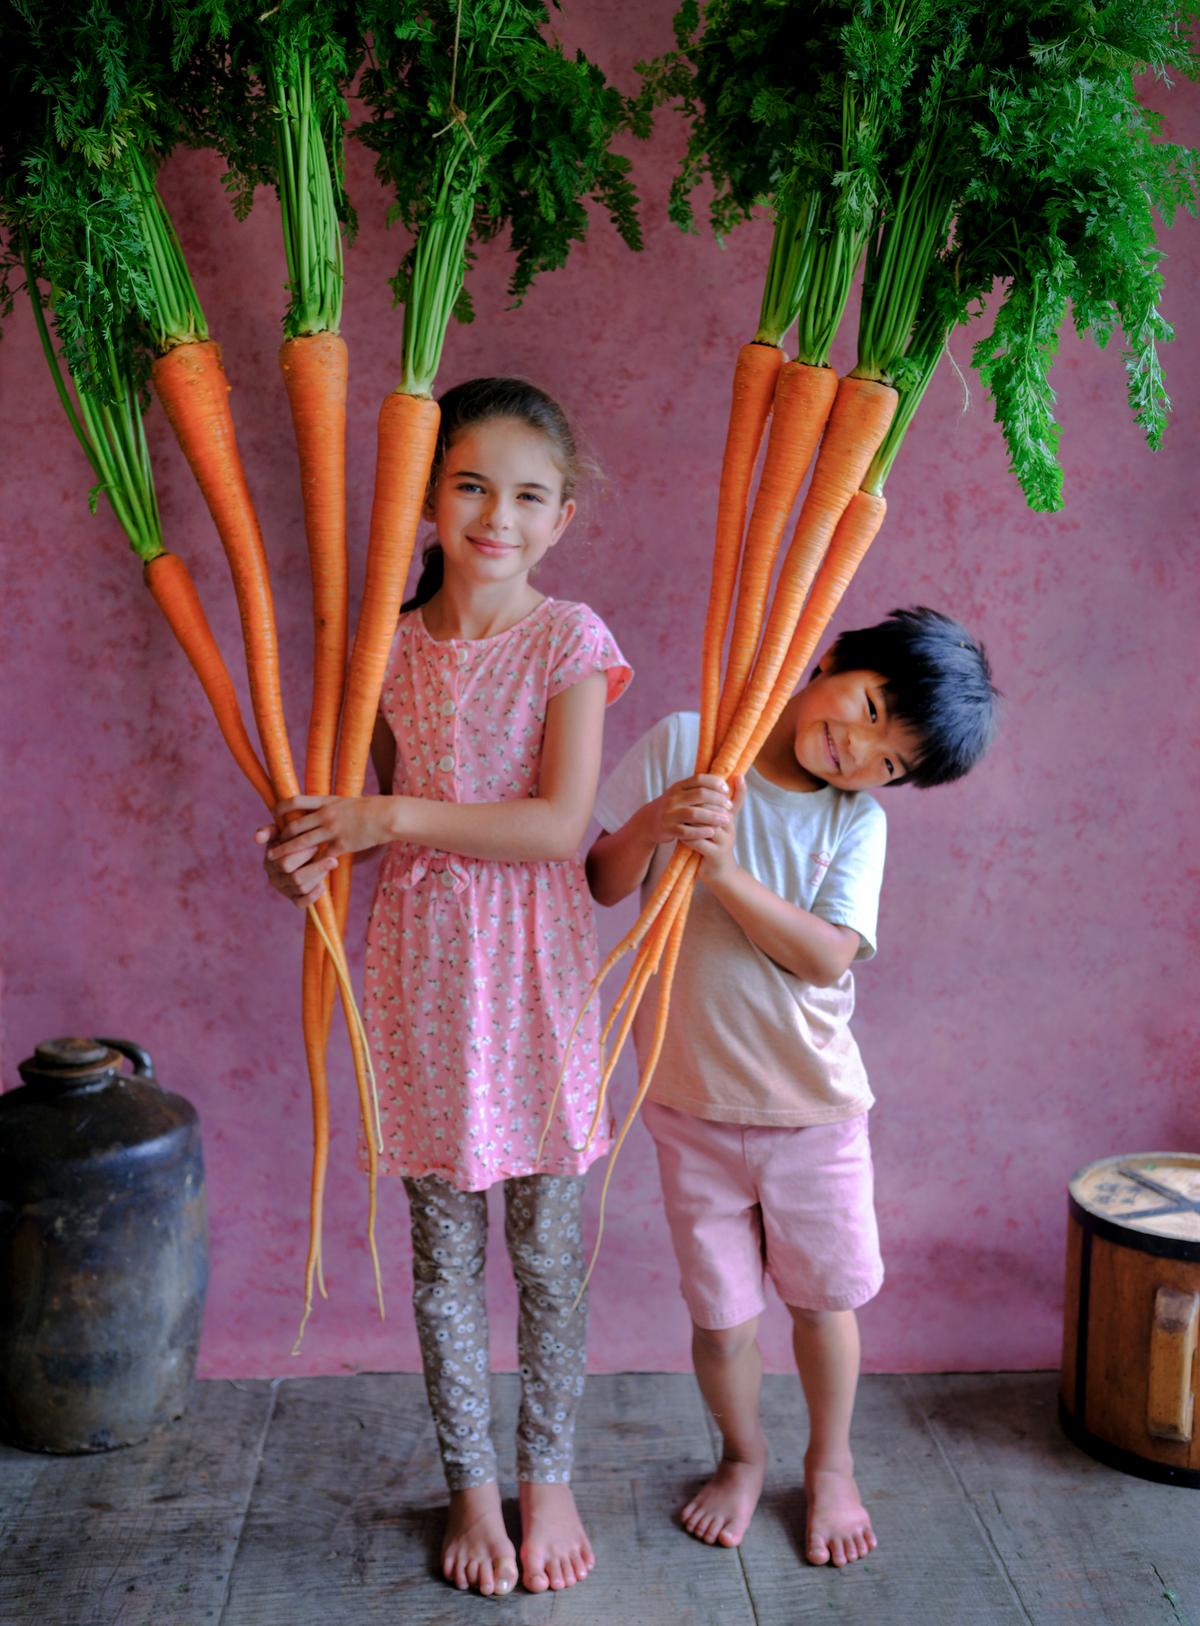 Manpukuji carrots, descended from the ancient Japanese long carrot types of the Edo period. (Baker Creek Heirloom Seed Co./RareSeeds.com)